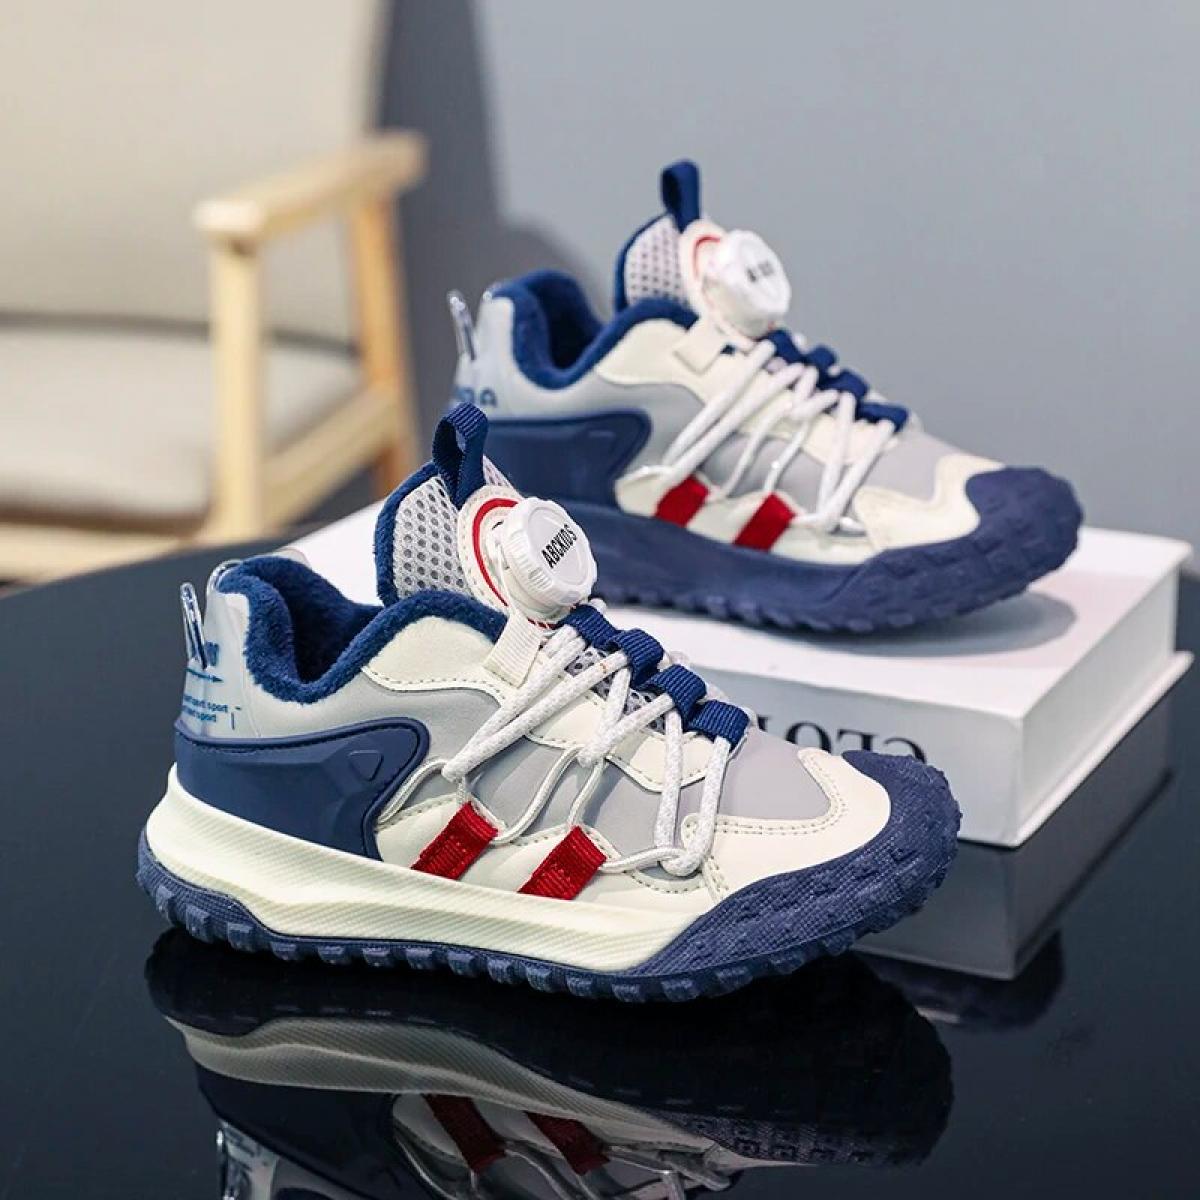 Girl Child Sneakers Children's Shoes Casual Autumn Winter Breathable Popular Soft Comfortable Wear Resistant Boys Sports